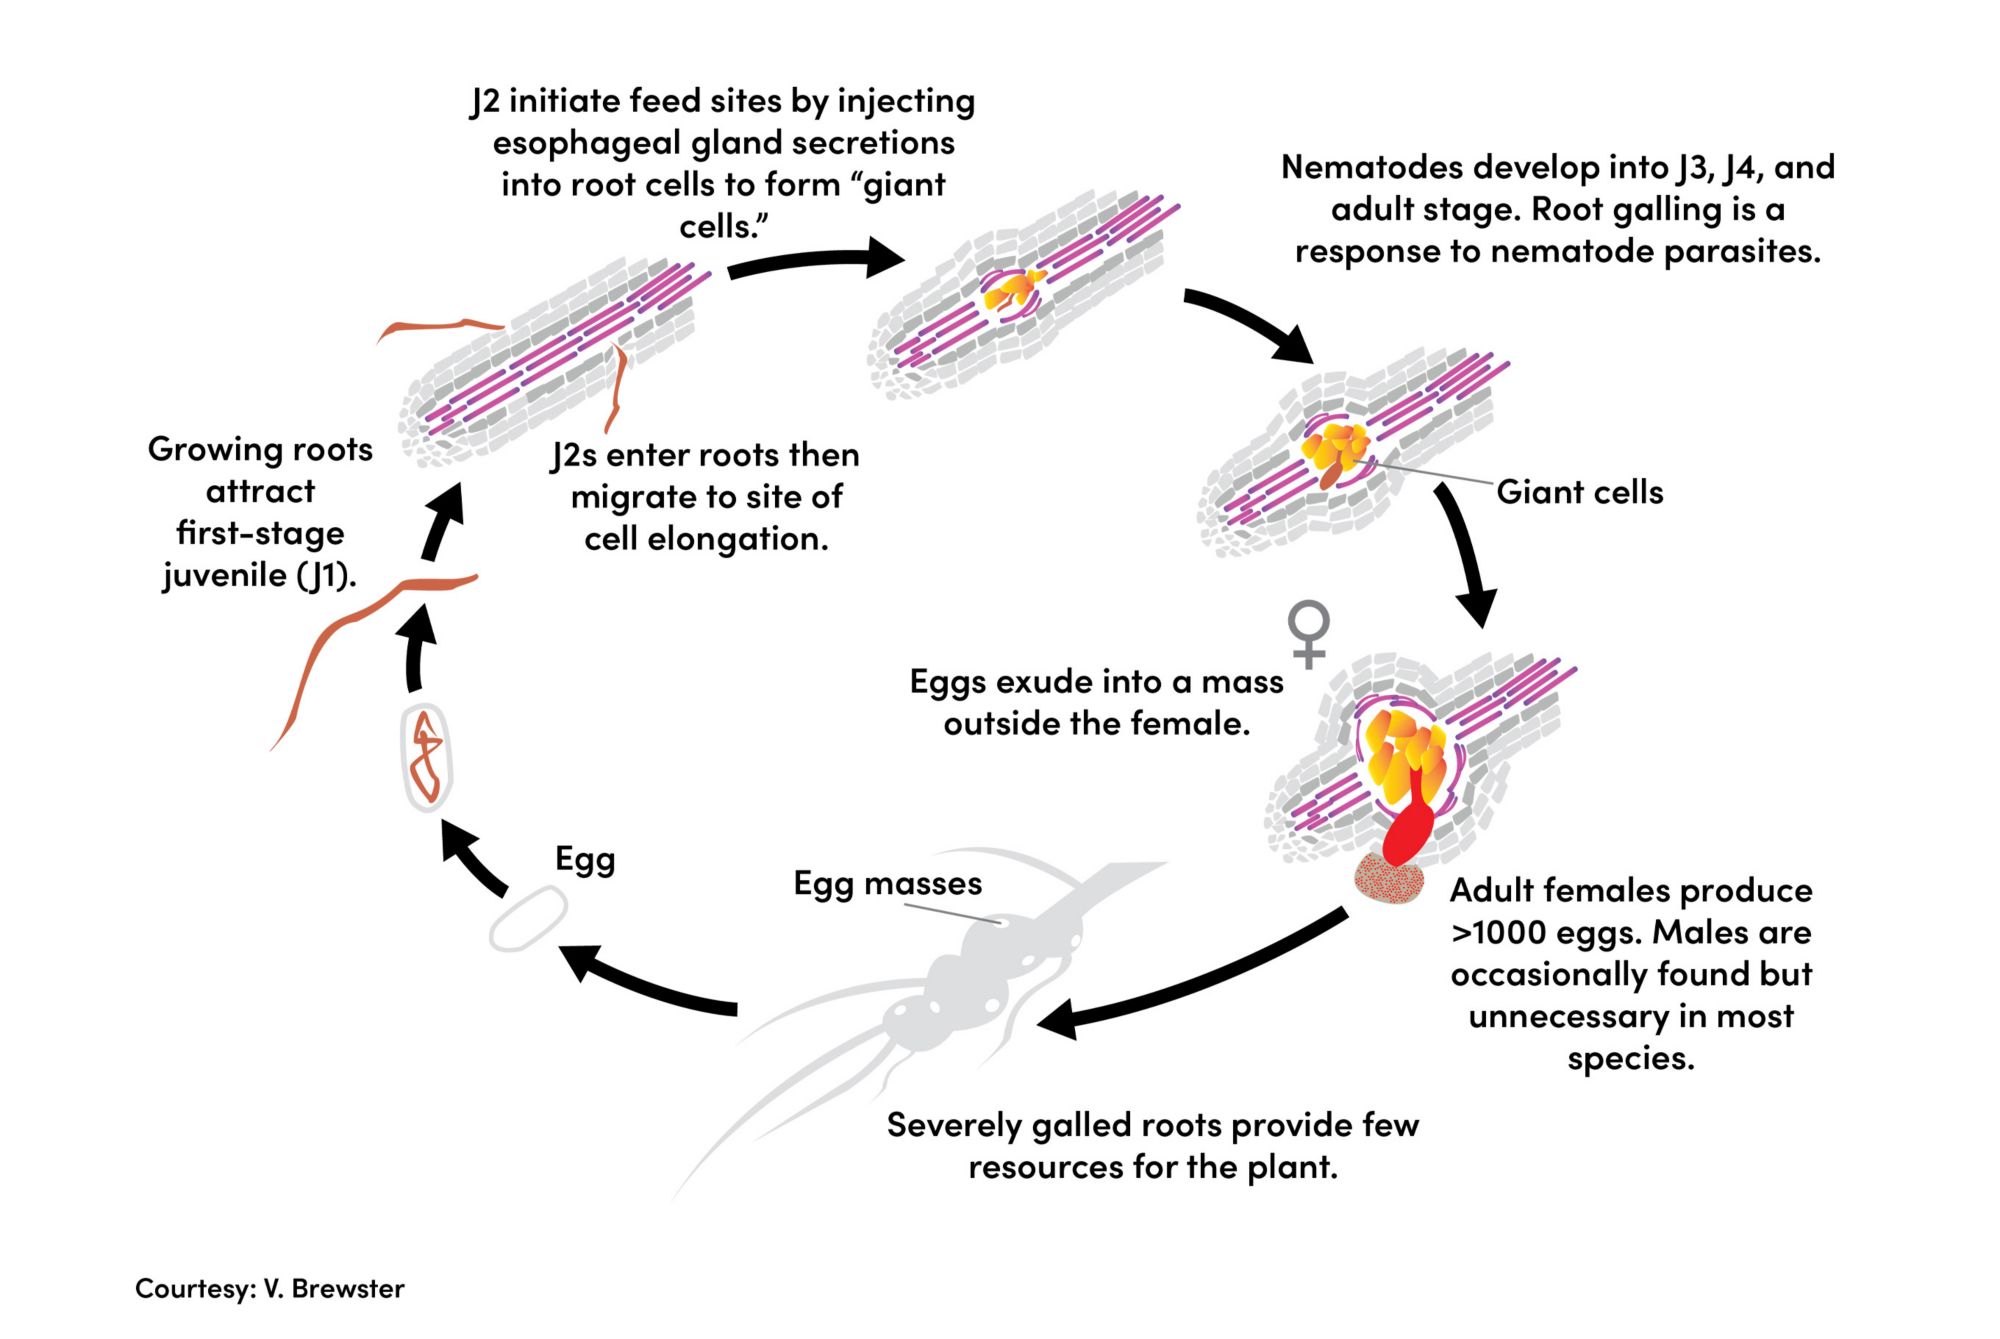 The diagram shows how root-knot nematodes use plant roots to get nutrients and exploit them to complete their life cycle 